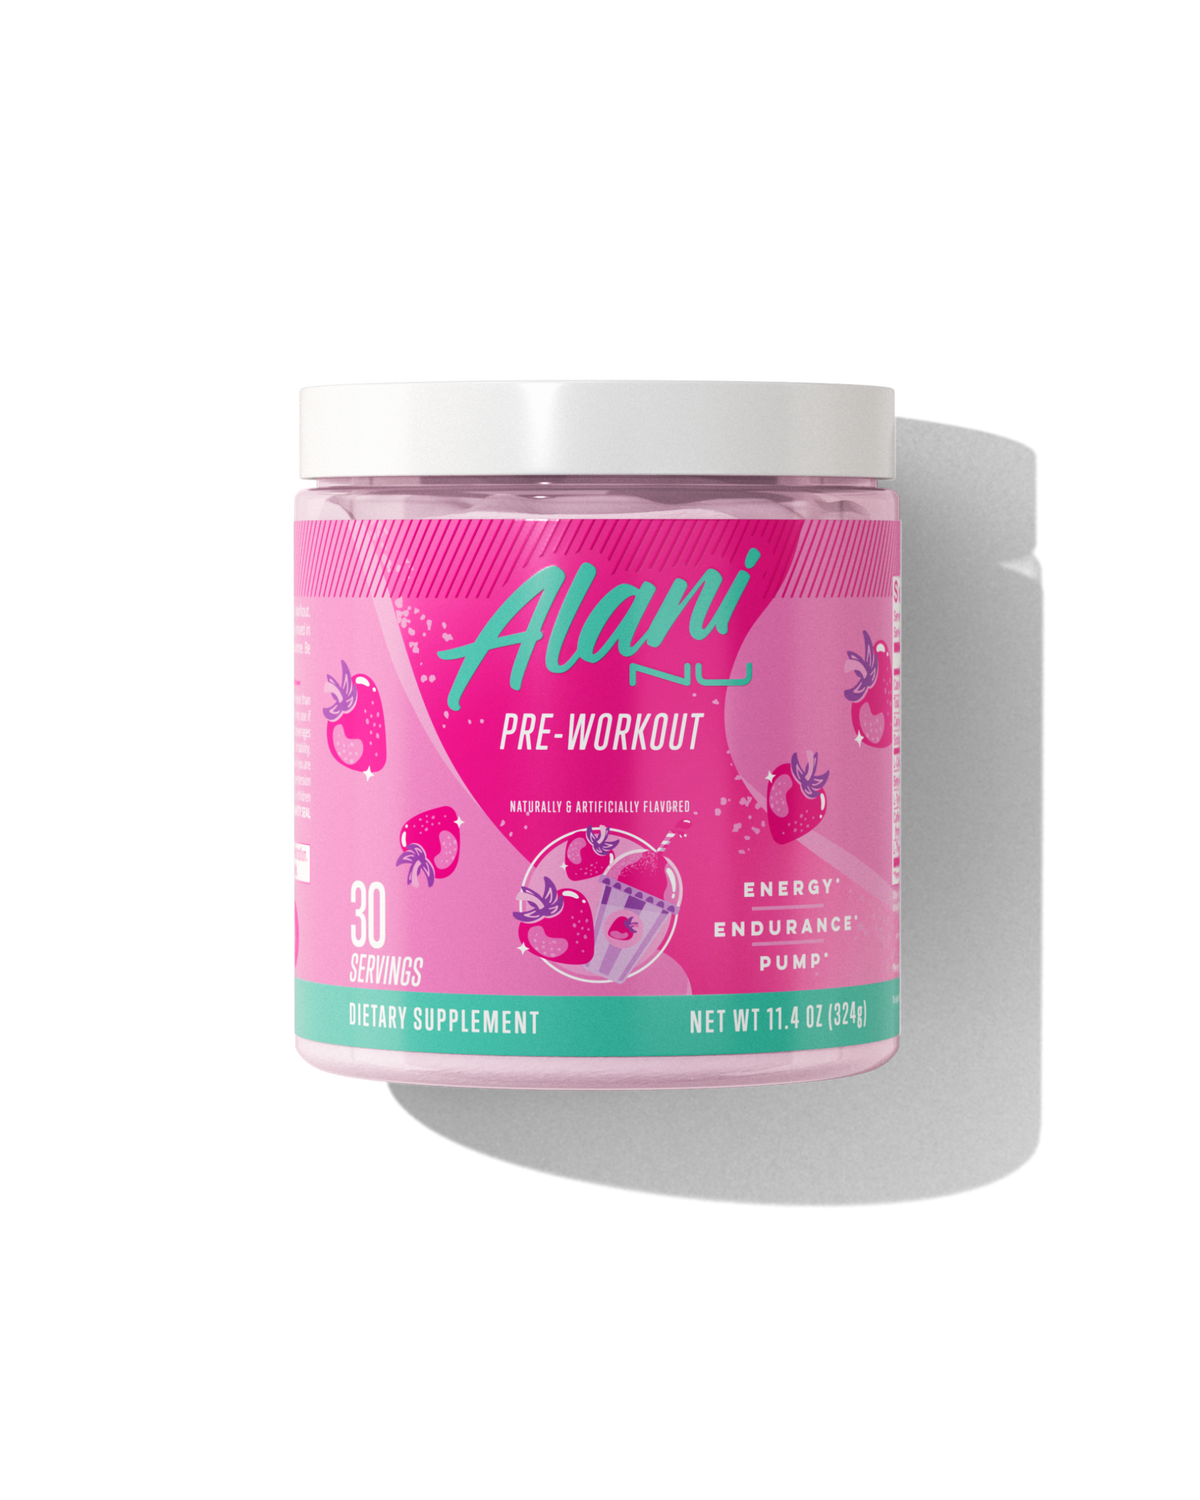 The front view of an Alani Nu Pink Slush Pre-Workout tub, made for 	endurance and pump. 